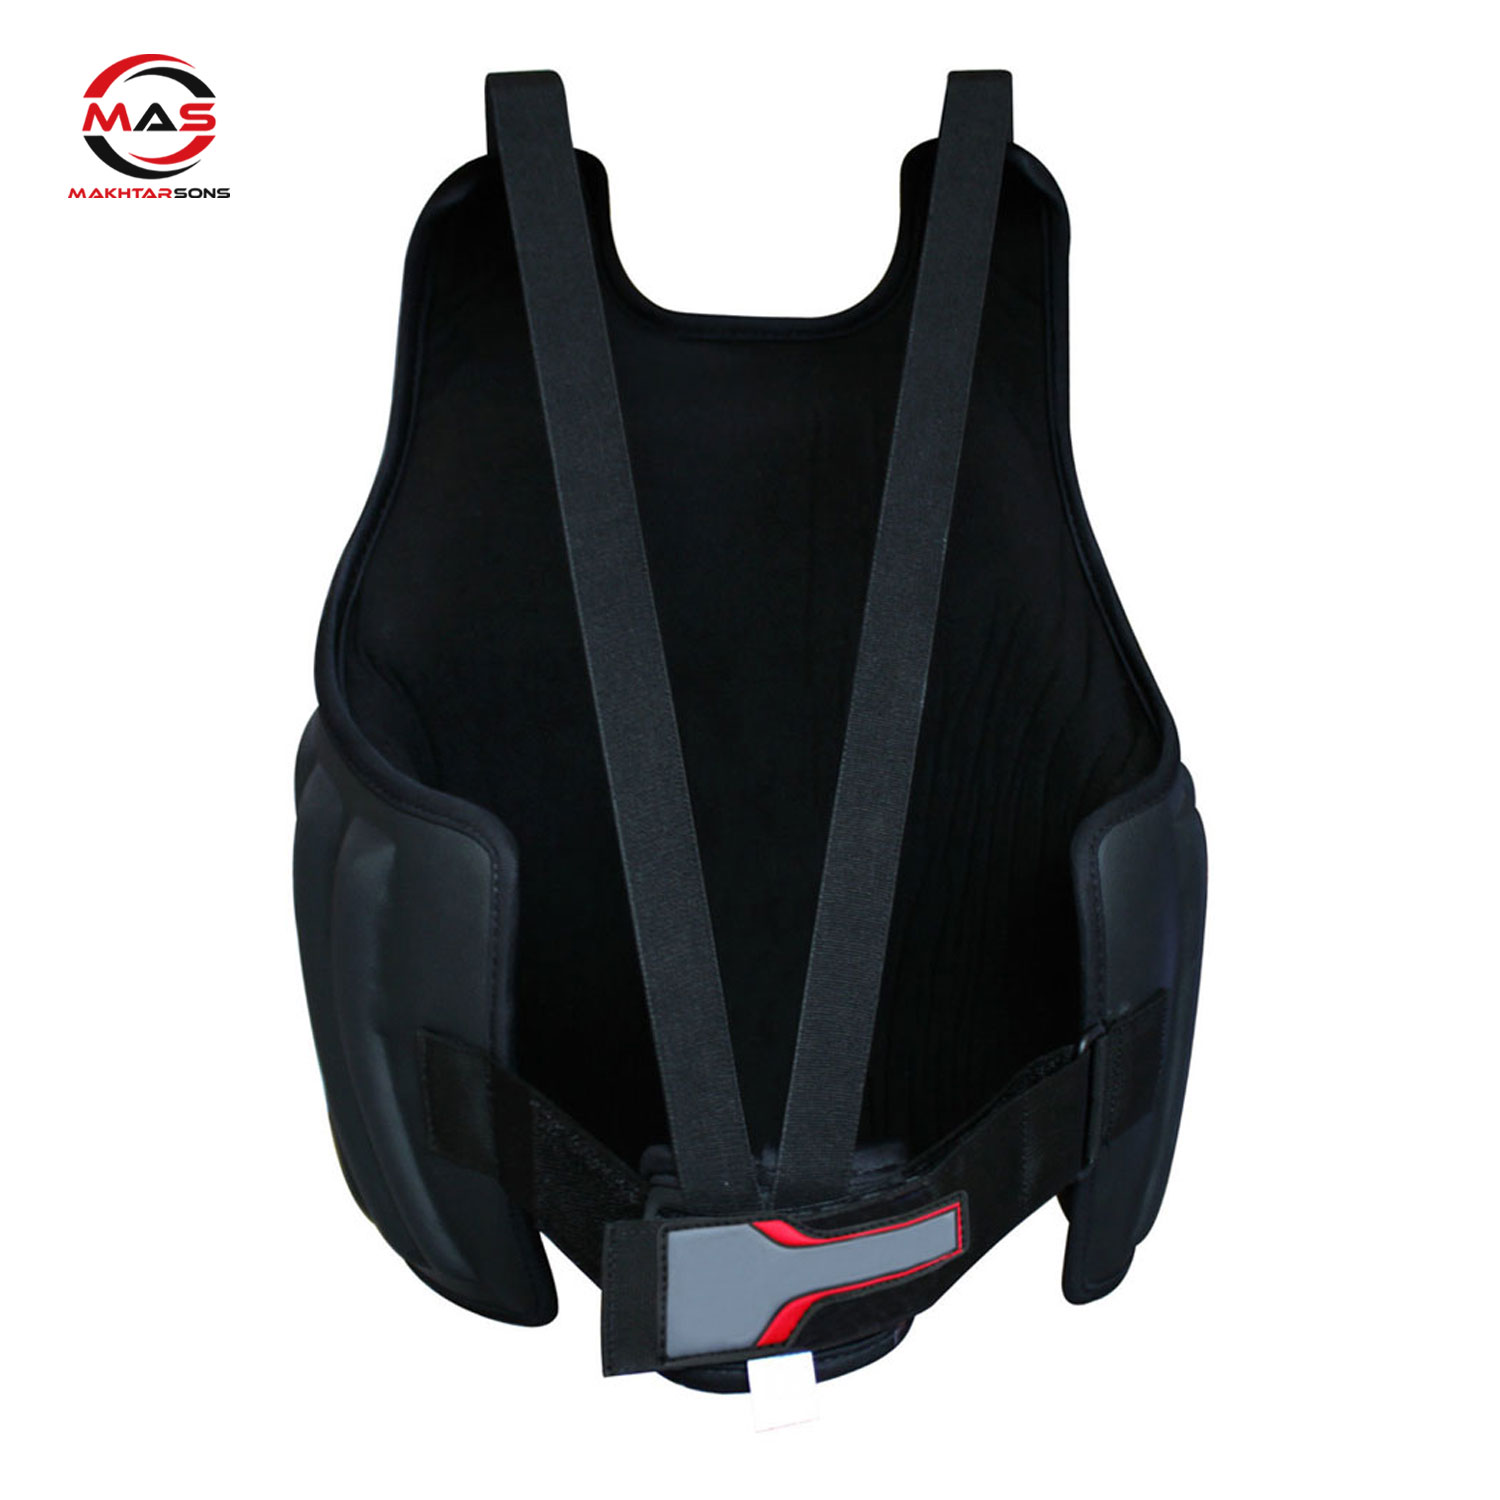 BODY CHEST PROTECTOR | MAS 278